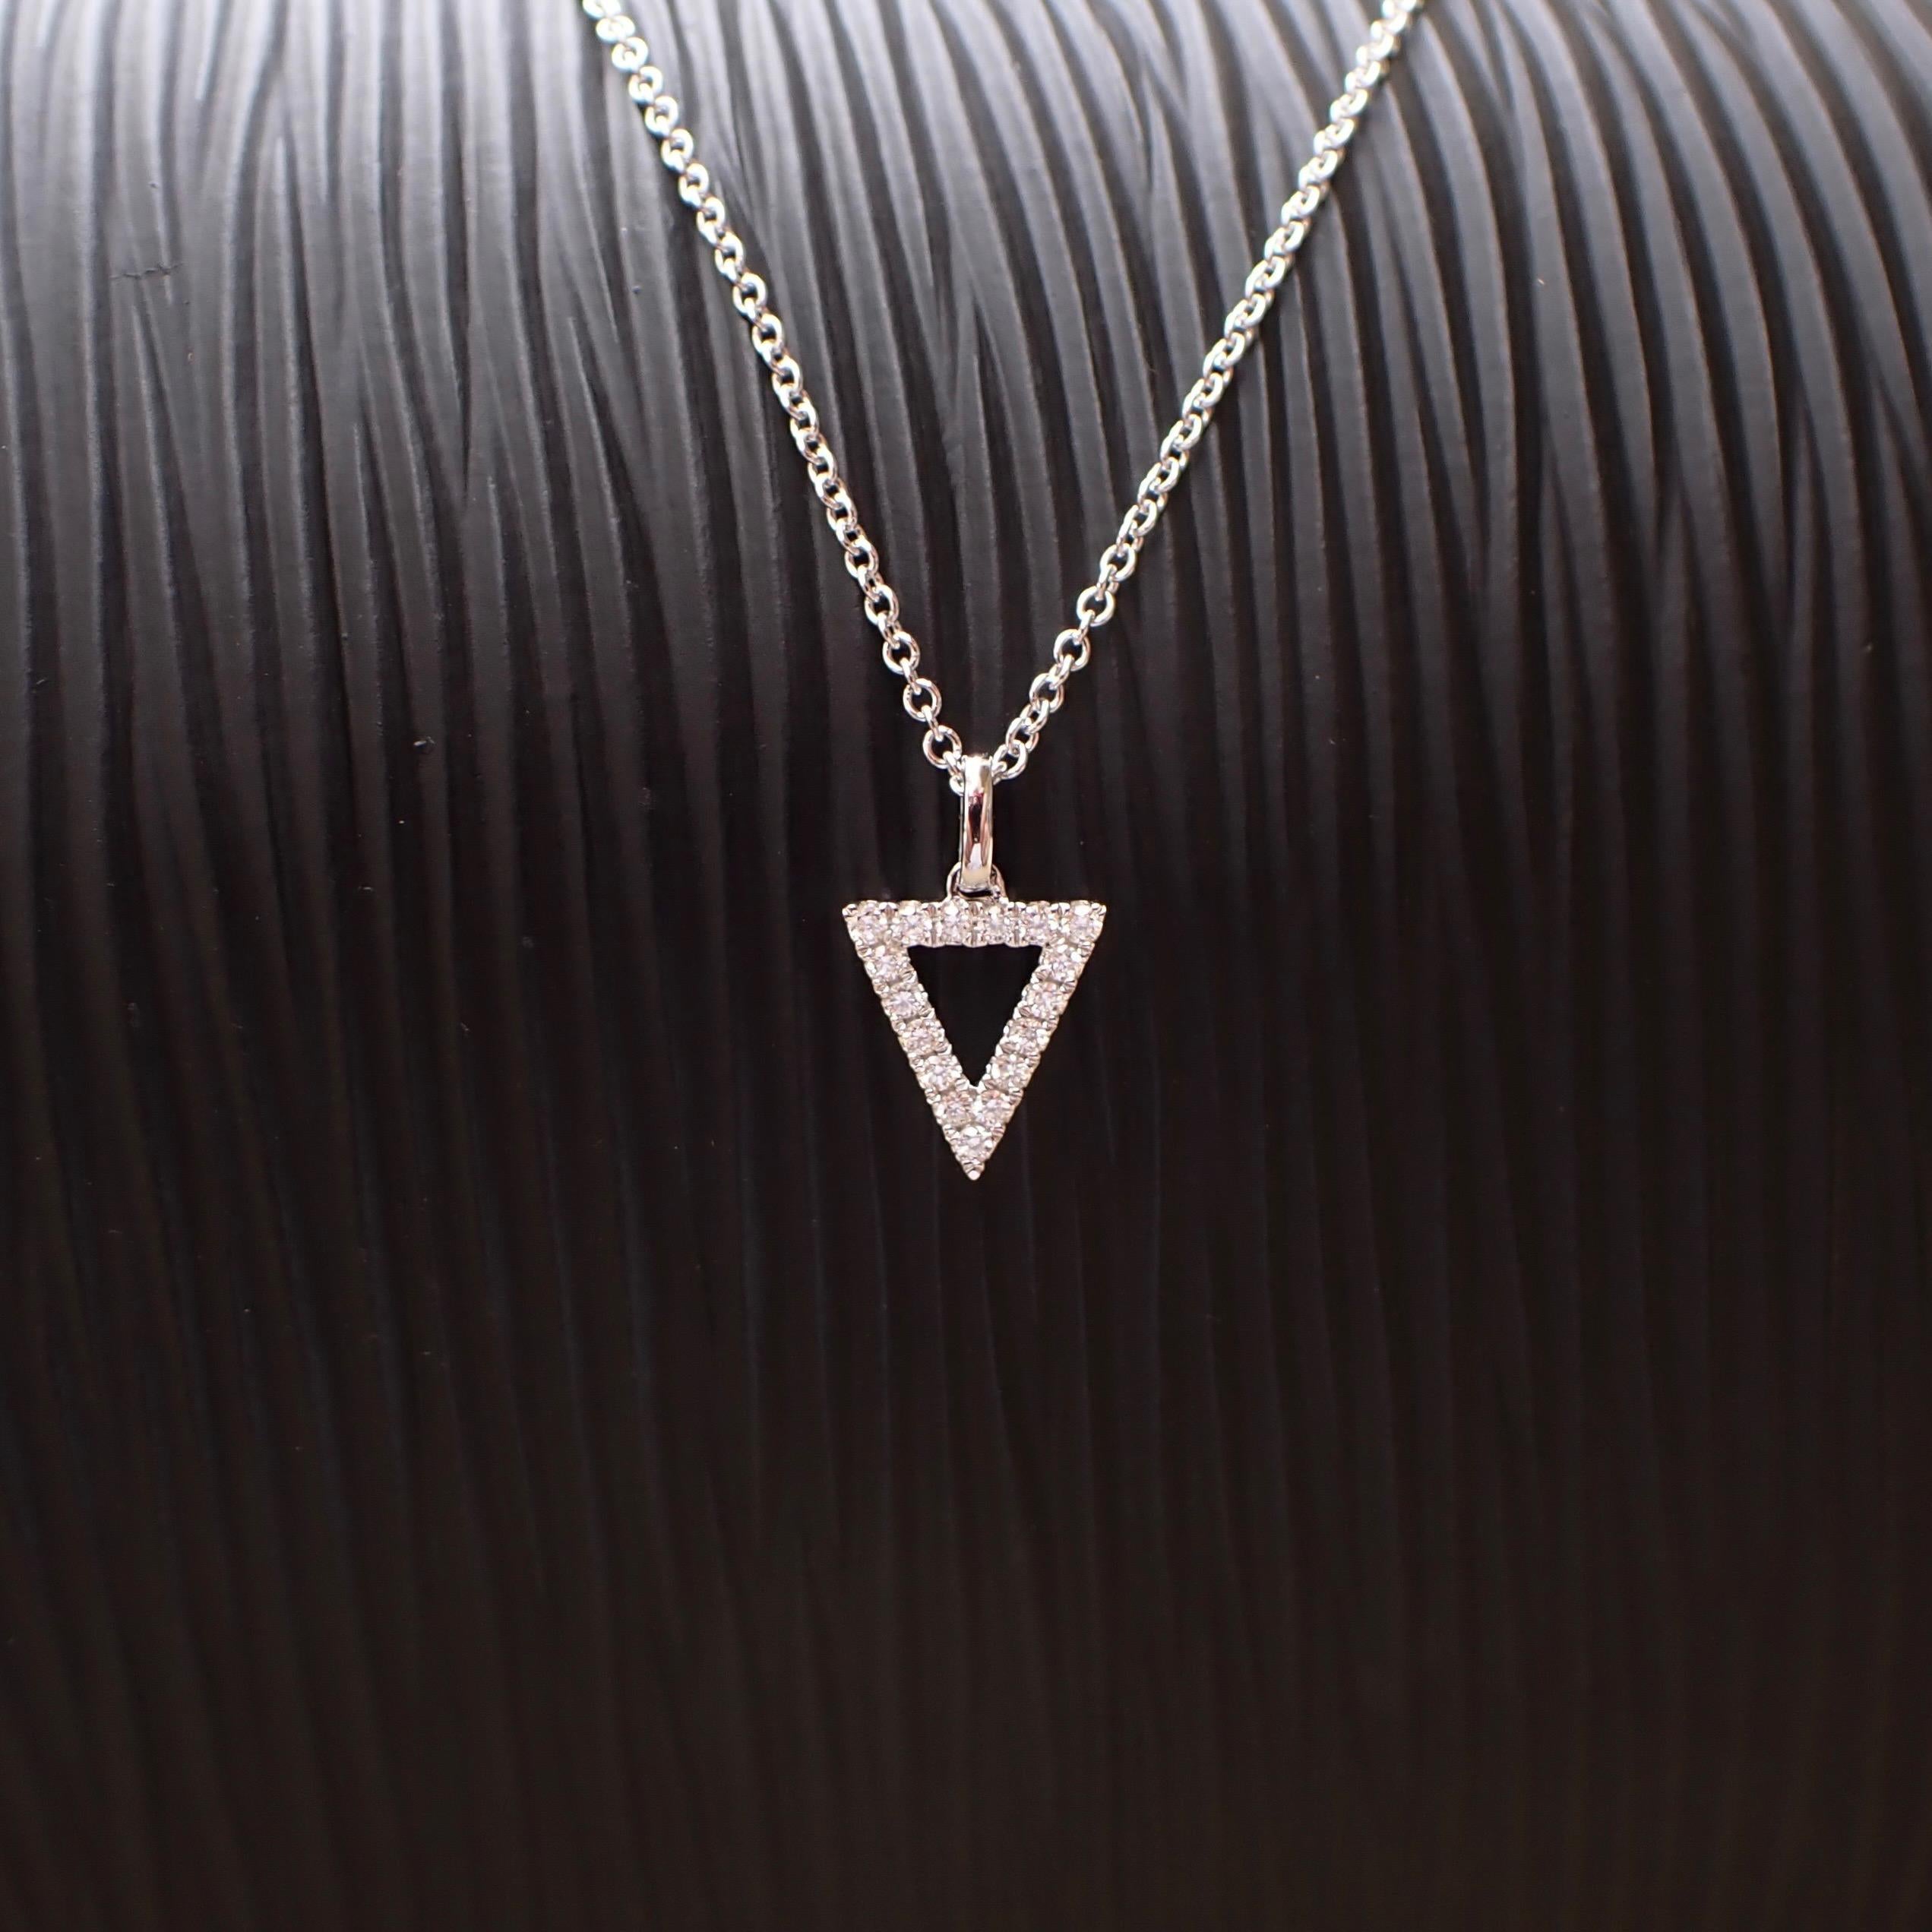 18k White Gold Triangle Pendant 0.15 carat Diamond hangs from a 16